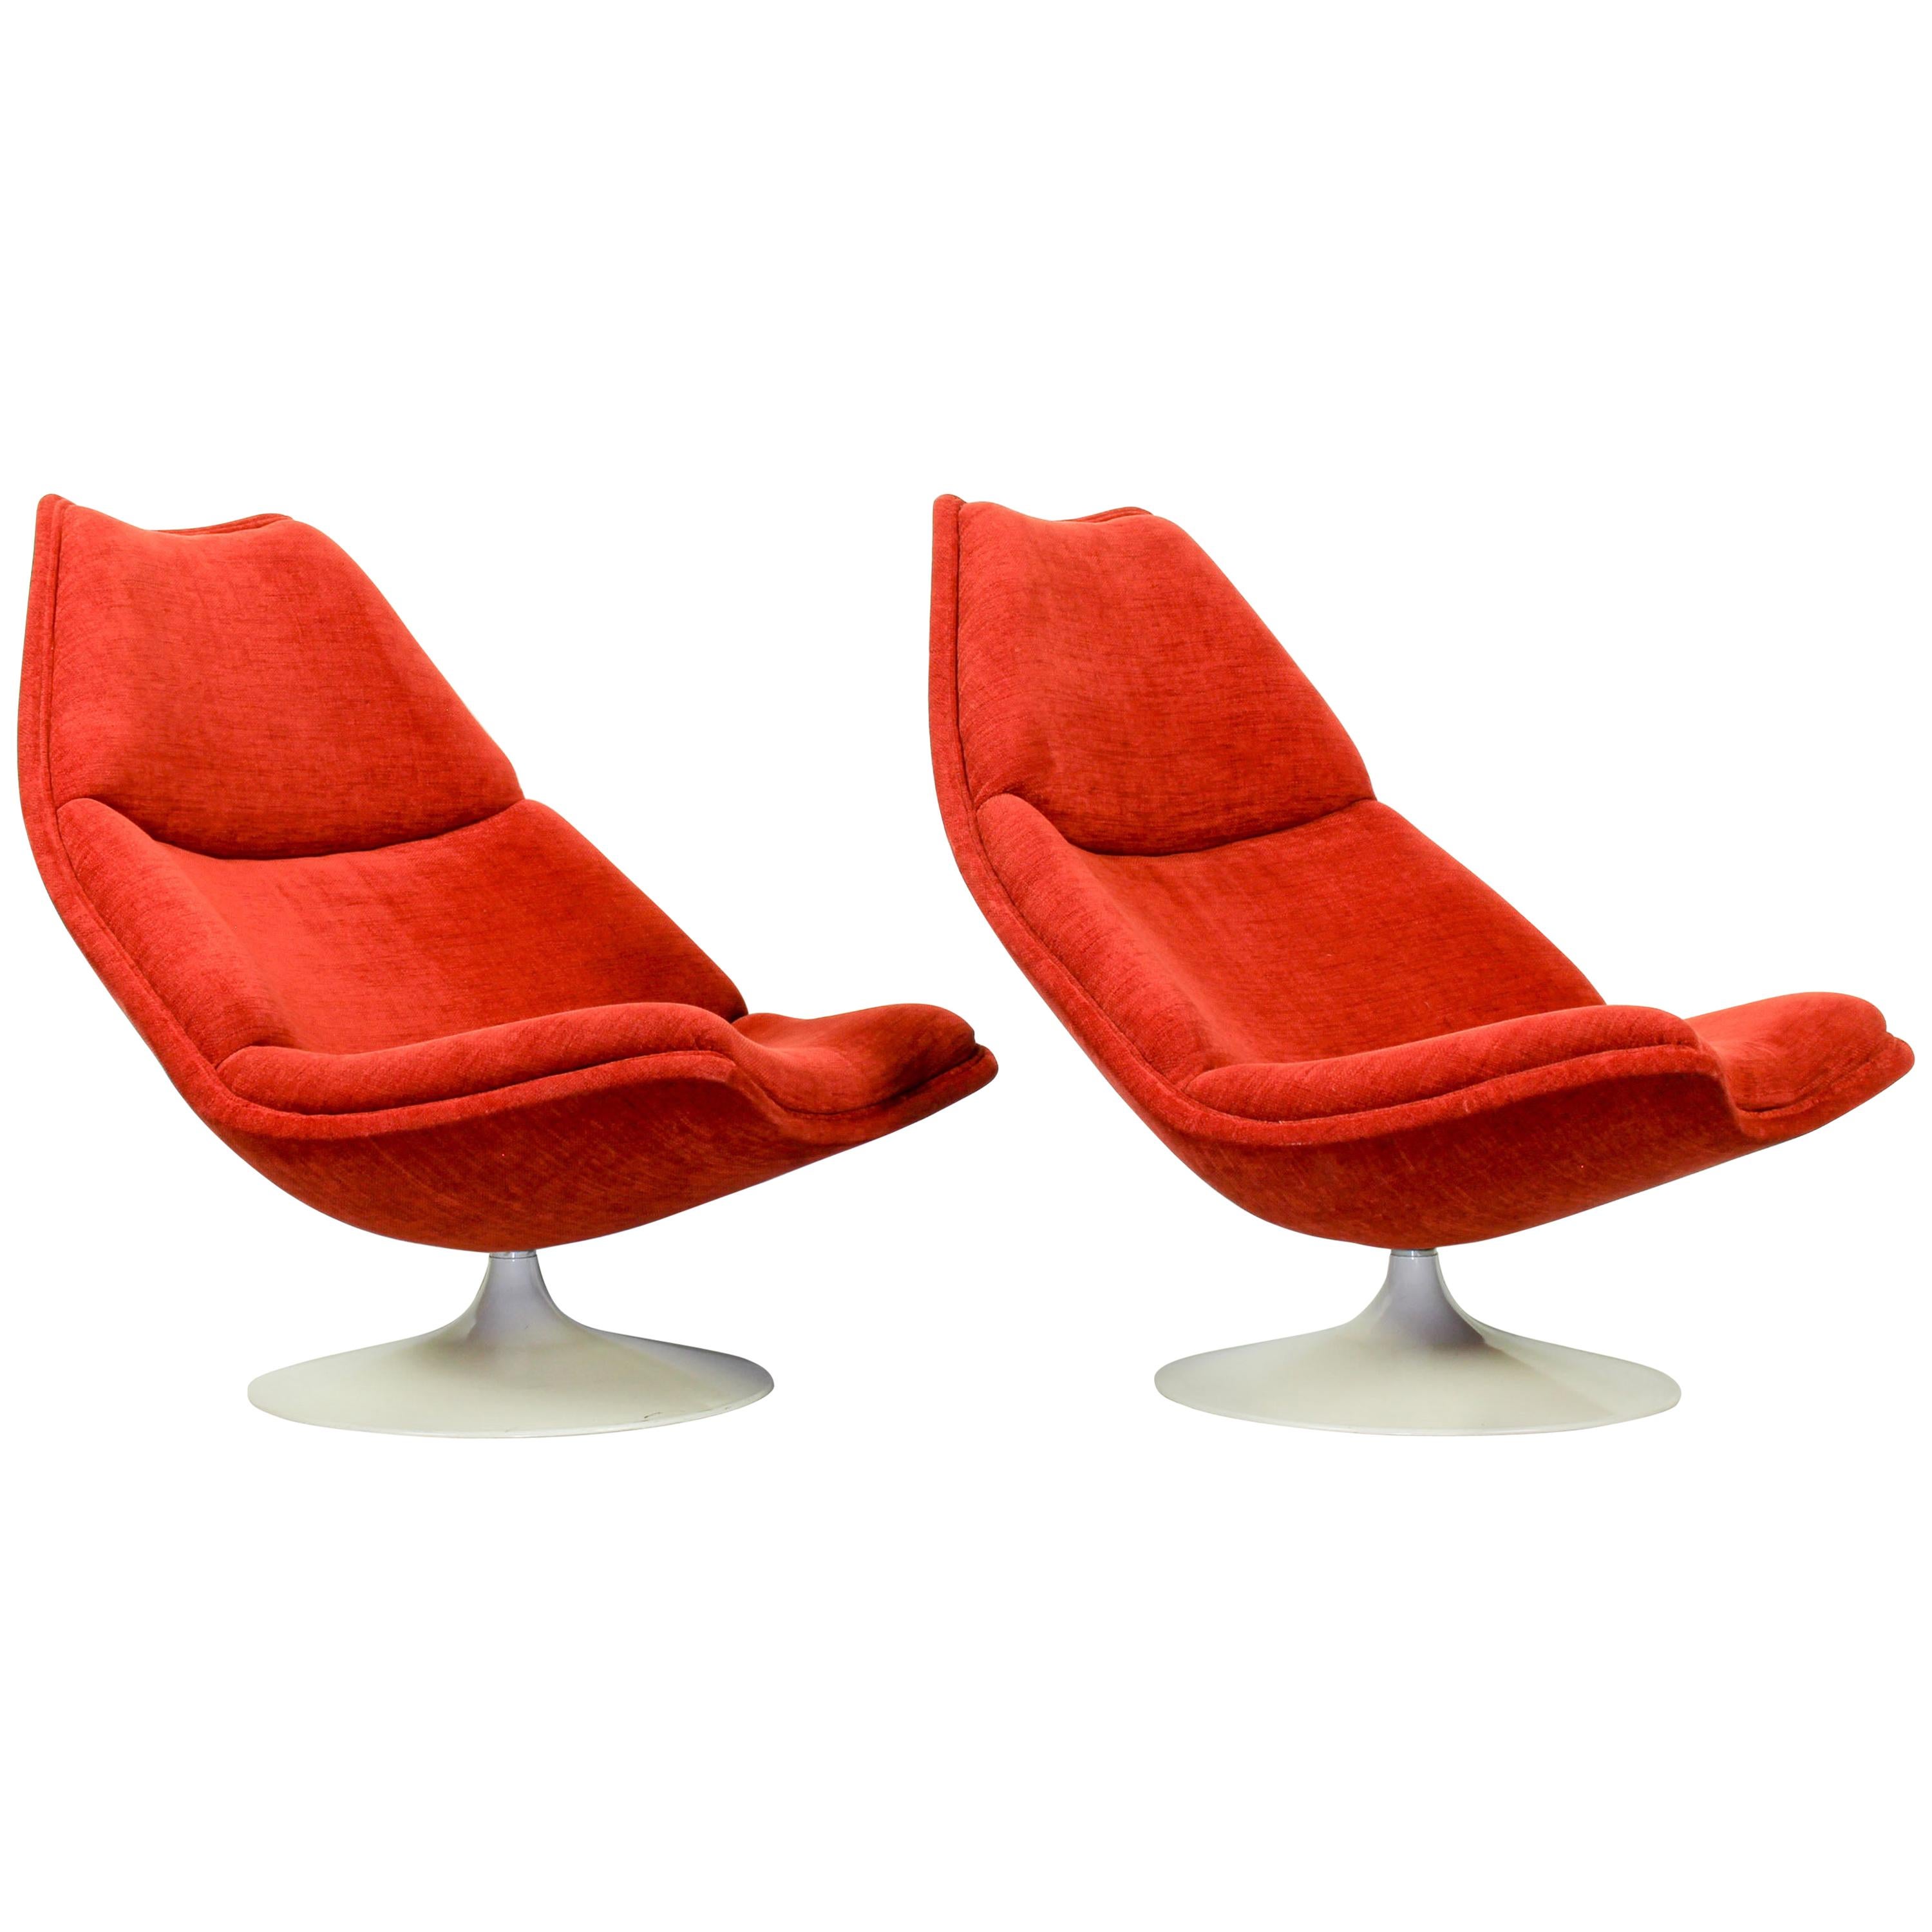 Set of 2 Vintage Model F510 Lounge Chairs by Geoffrey Harcourt for Artifort, 196